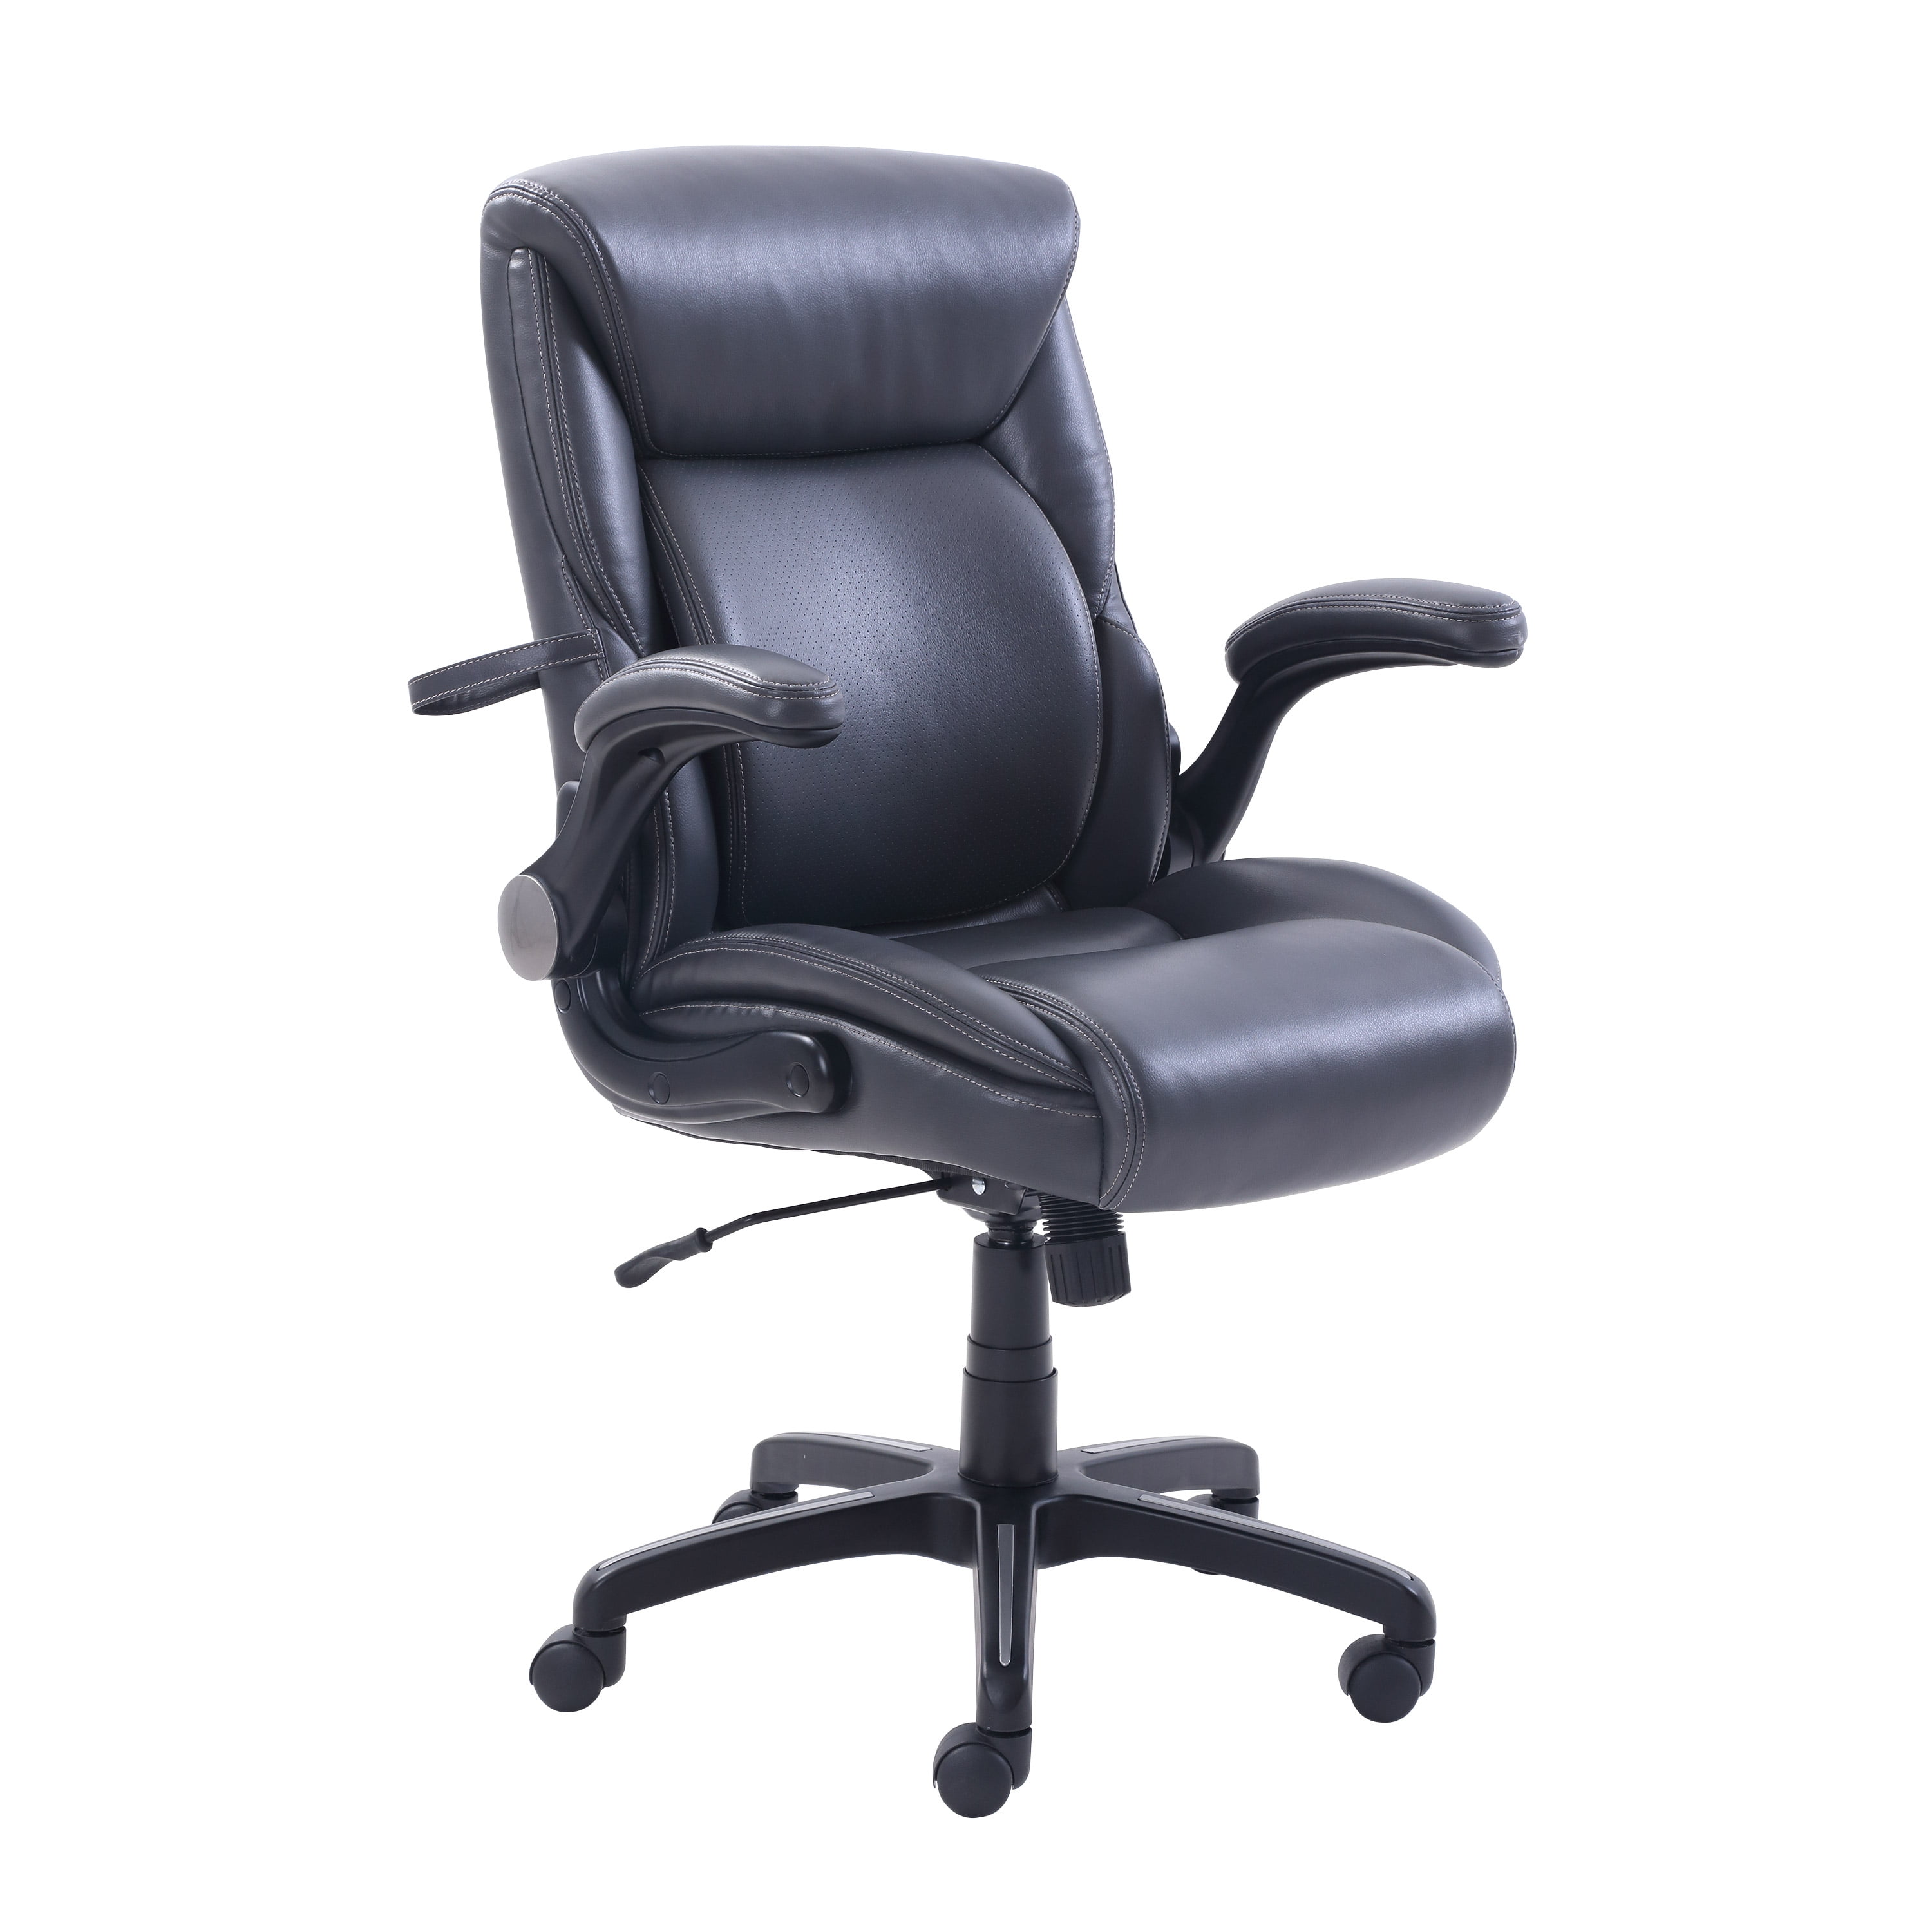 MyOfficeInnovations Bonded Leather Chair Grey 24328568 53253 